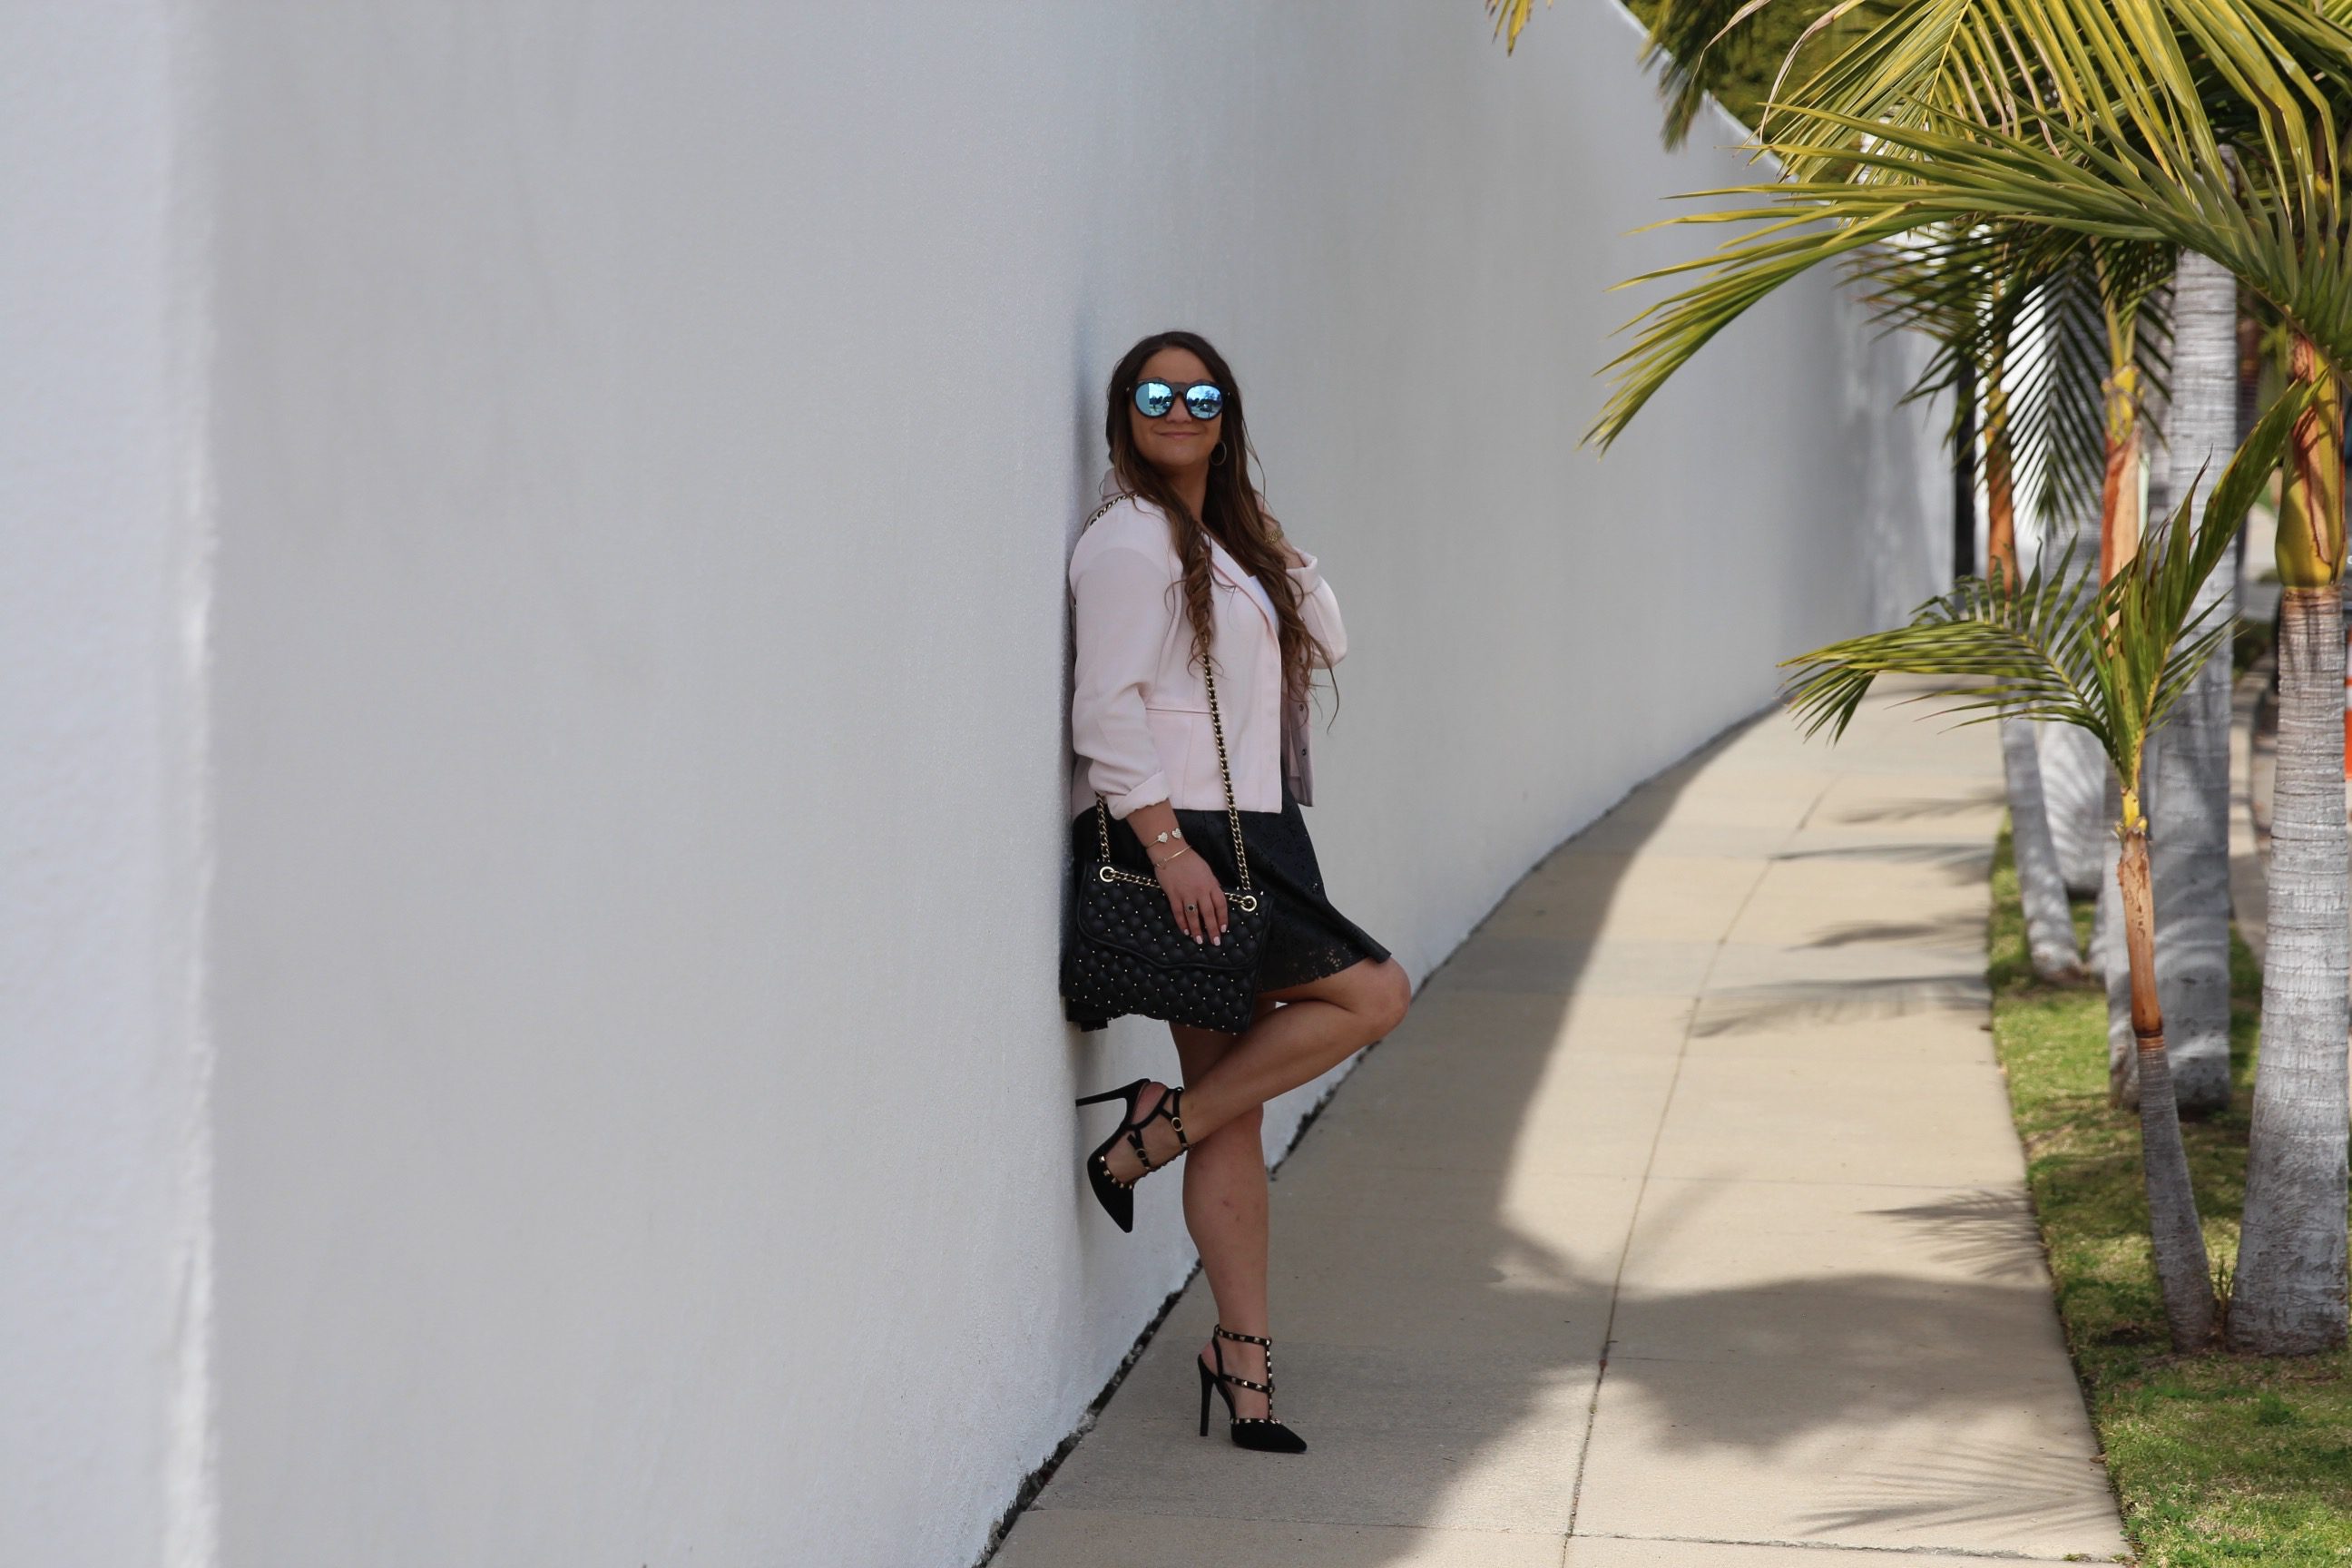 missyonmadison, fashion blog, fashion blogger, perforated skirt, black leather skirt, white crop top, white short sleeve crop top, light pink moto jacket, black studded heels, rockstud heels, look for less, le specs sunglasses, mirrored sunglasses, brunette hair, summer style, how to style a moto jacket, how to wear a leather skirt, la blogger, la style, melissa tierney,